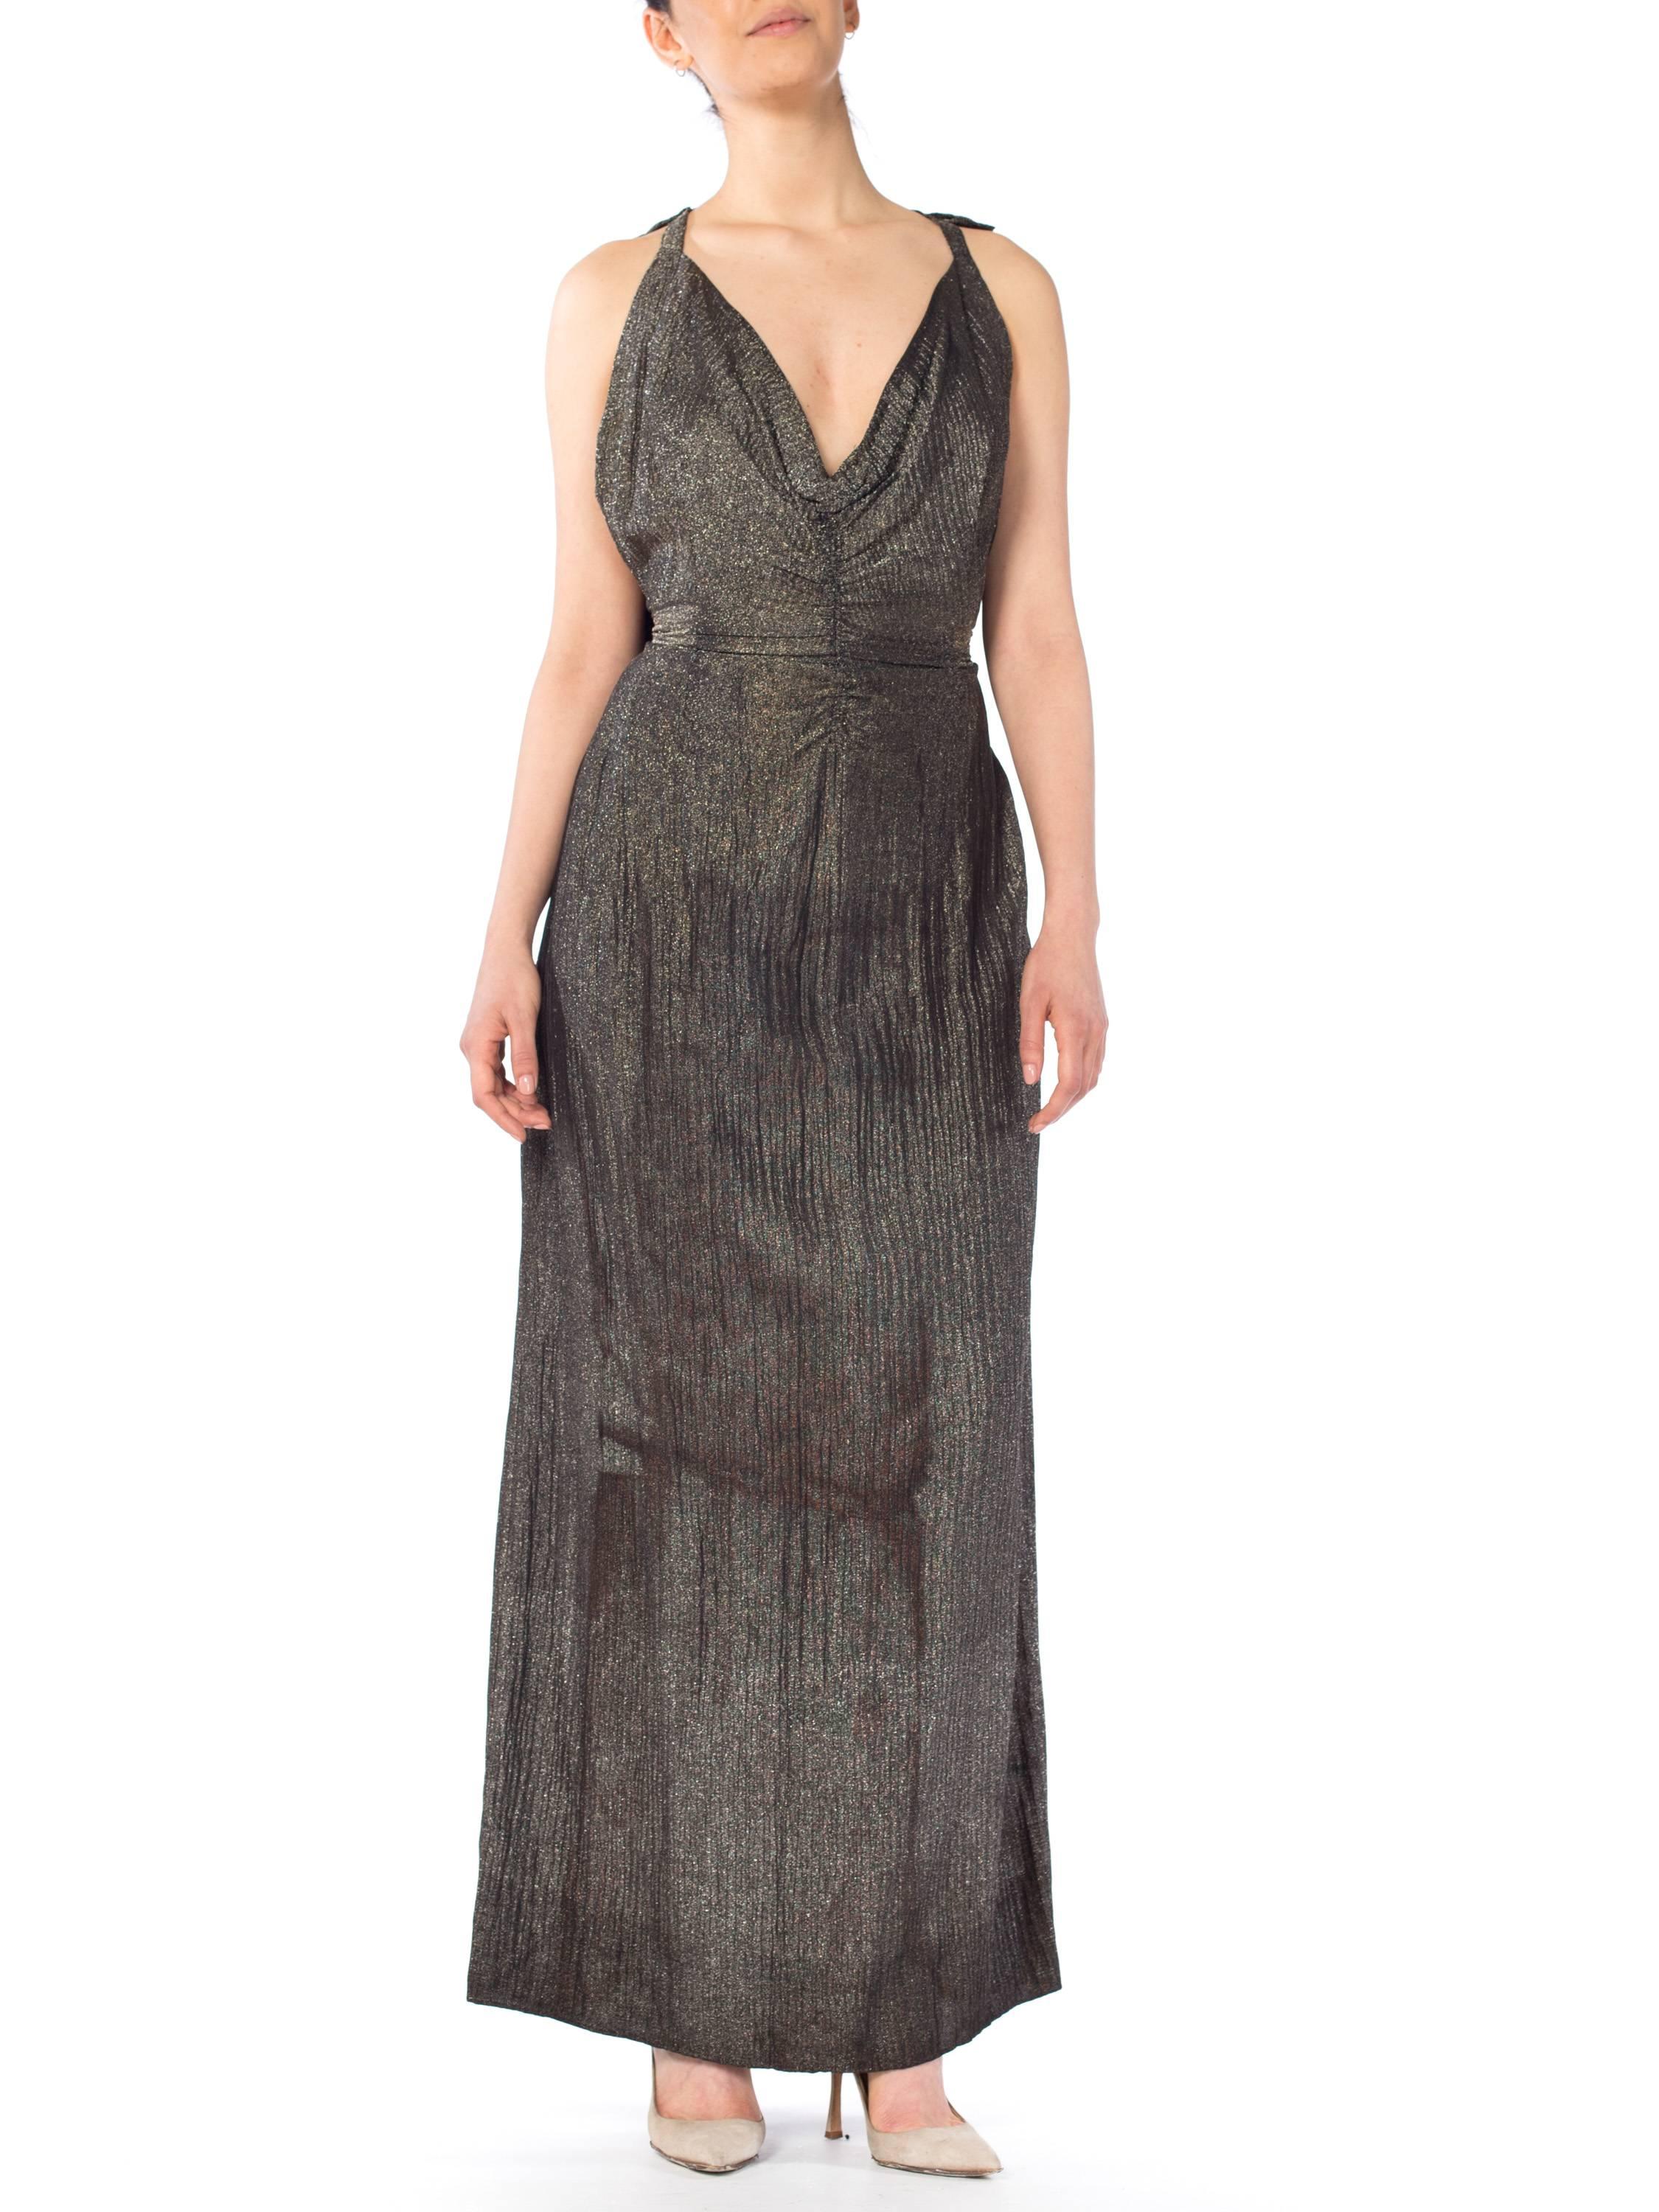 MORPHEW COLLECTION Black & Gold Antique Patina Silk Lamé  Gown With Low Back An For Sale 1